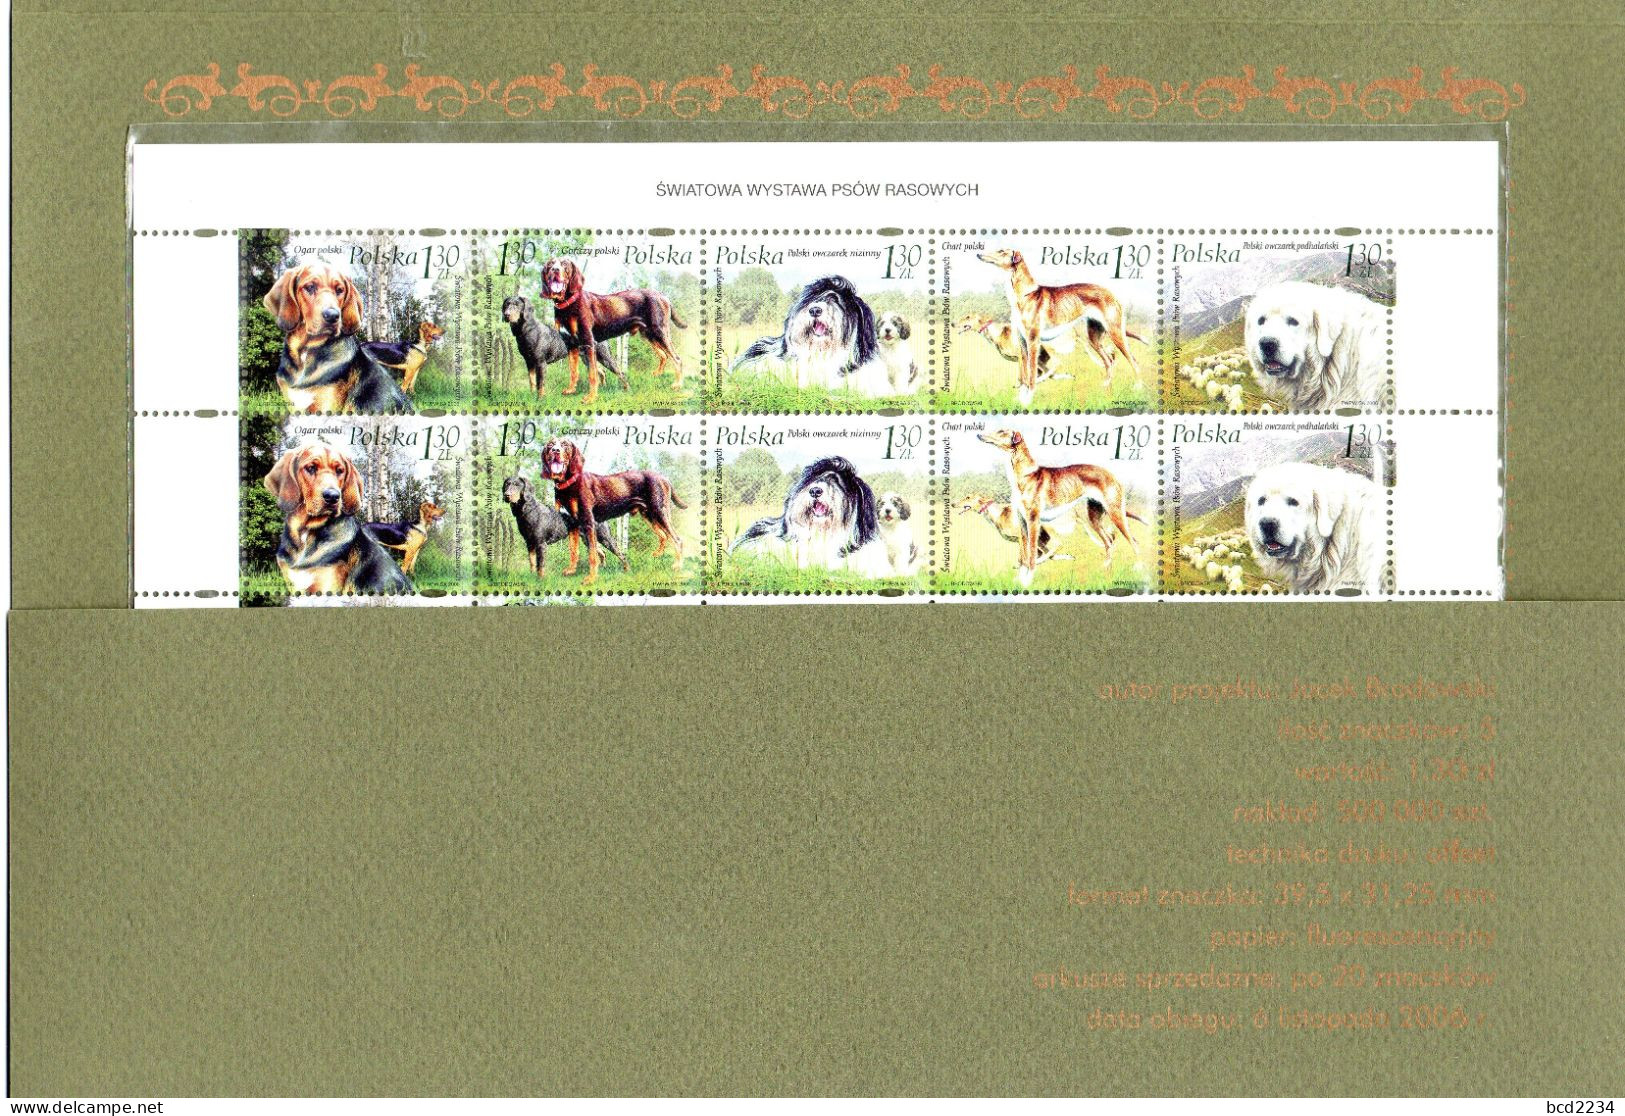 POLAND 2006 RARE POLISH POST OFFICE LIMITED EDITION FOLDER: SHEET OF 20 STAMPS OF WORLD EXHIBITION SHOW PEDIGREE DOGS - Brieven En Documenten